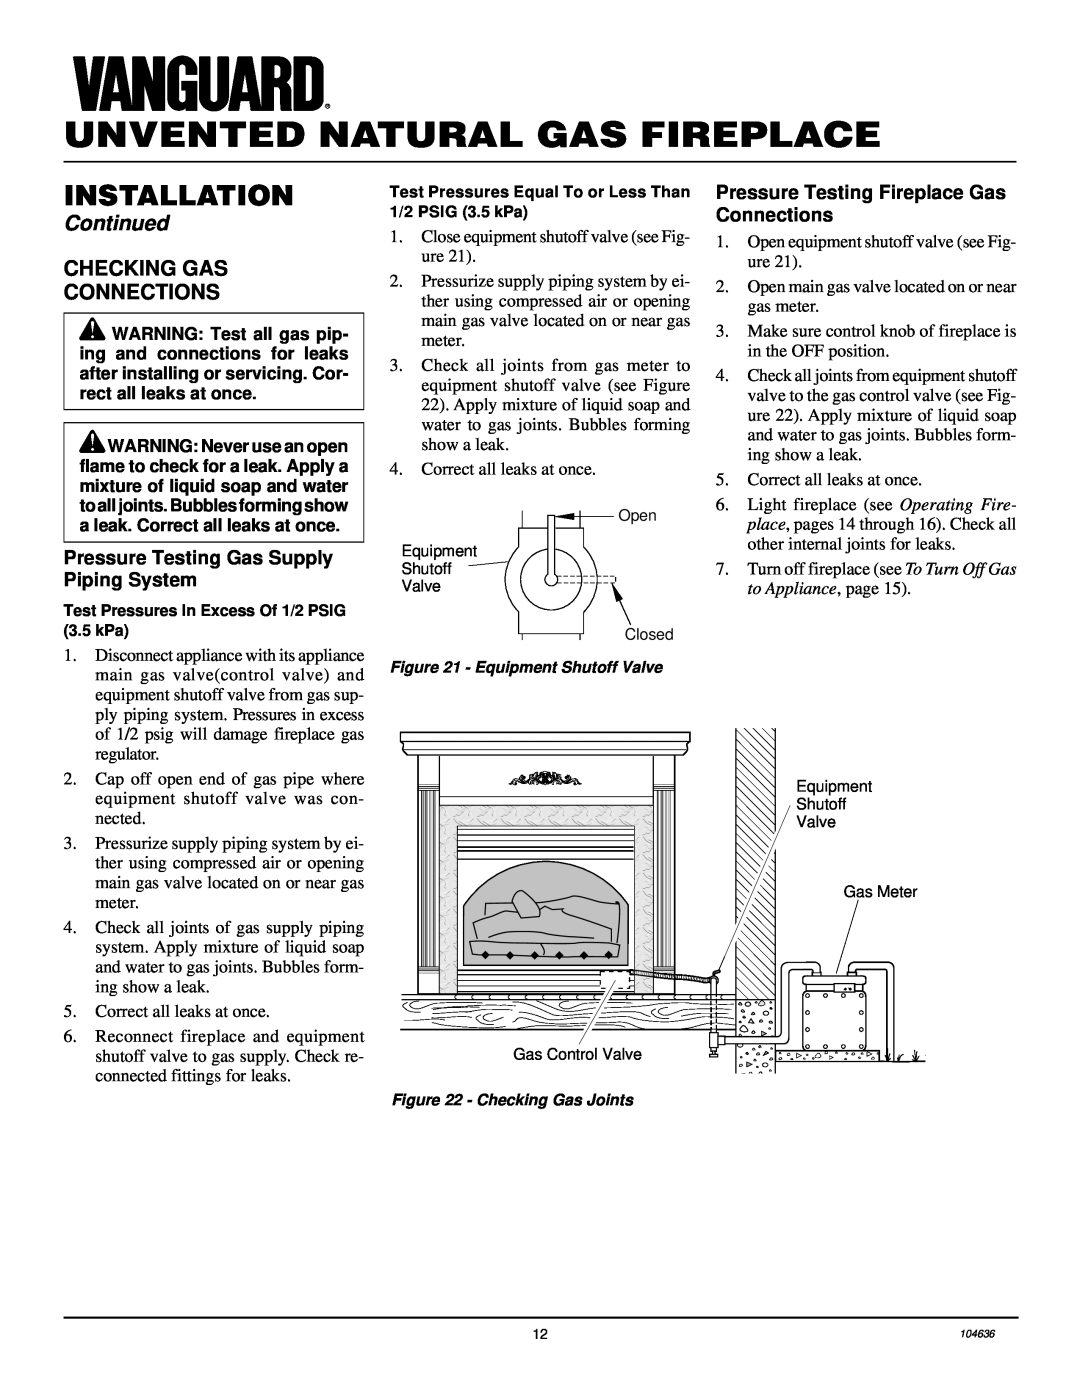 Desa VCGF30NR installation manual Checking Gas Connections, Unvented Natural Gas Fireplace, Installation, Continued 